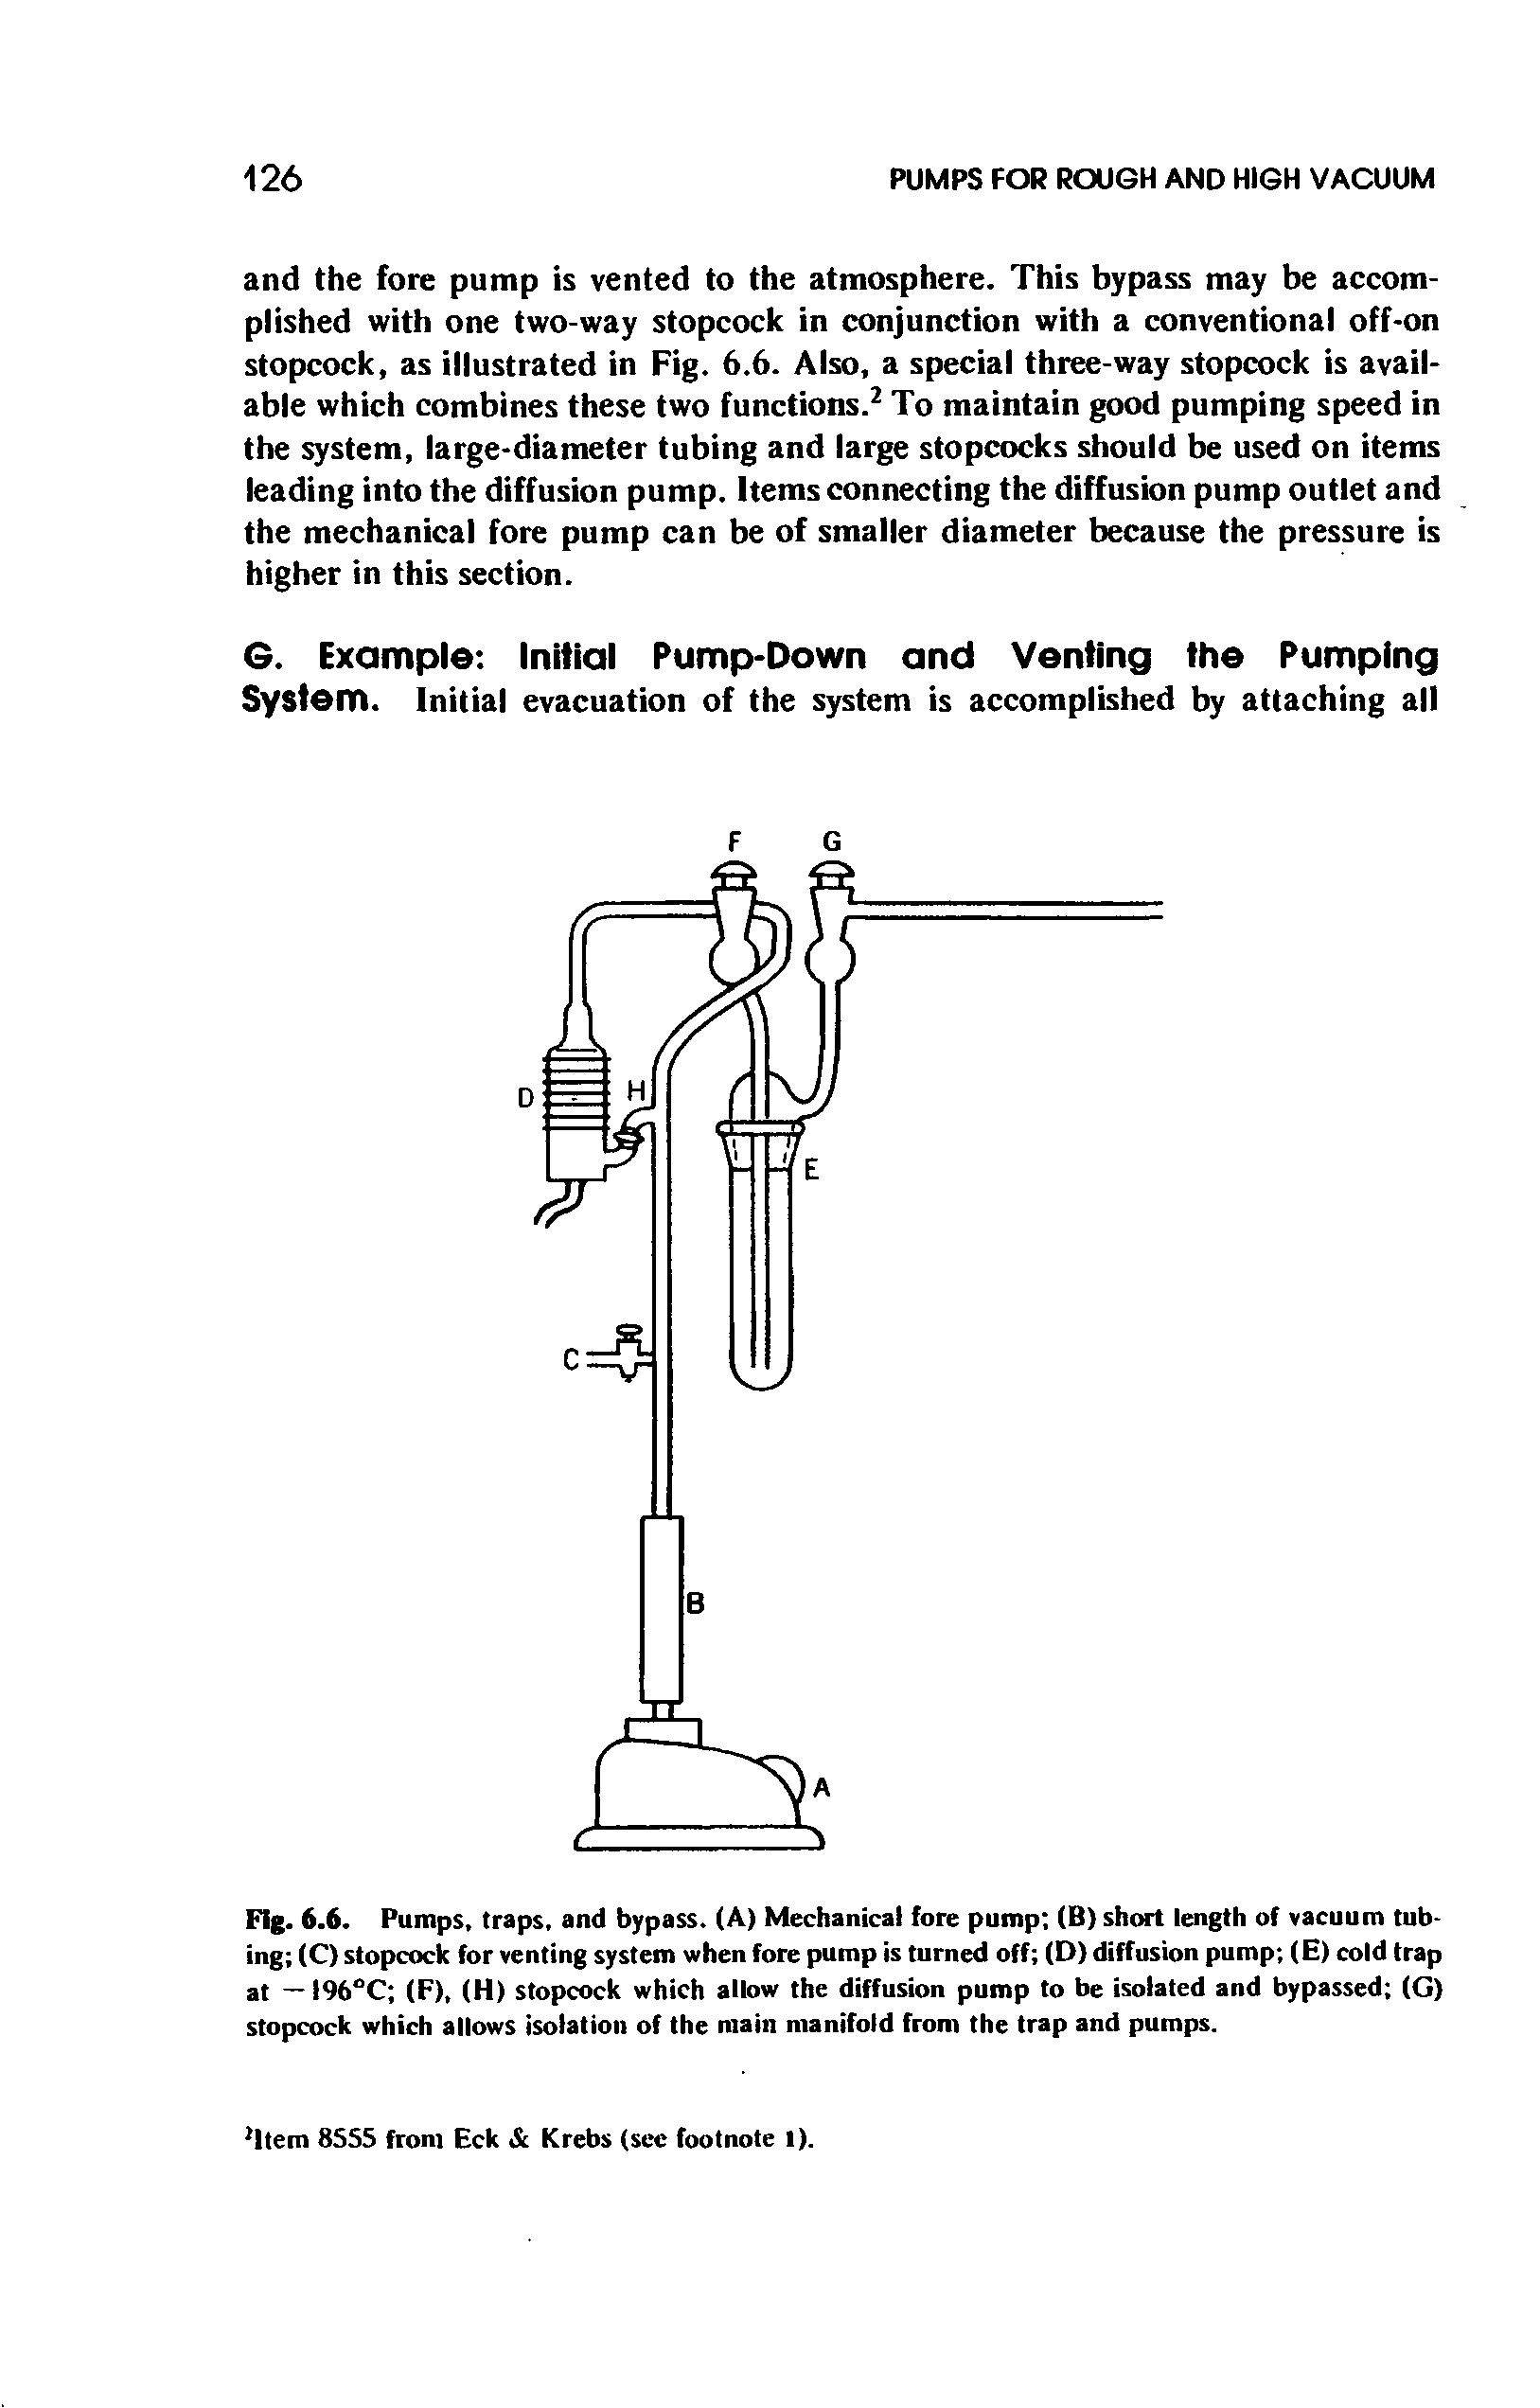 Fig. 6.6. Pumps, traps, and bypass. (A) Mechanical fore pump (B) short length of vacuum tubing (C) stopcock for venting system when fore pump is turned off (D) diffusion pump (E) cold trap at — 196°C (F), (H) stopcock which allow the diffusion pump to be isolated and bypassed (G) stopcock which allows isolation of the main manifold from the trap and pumps.